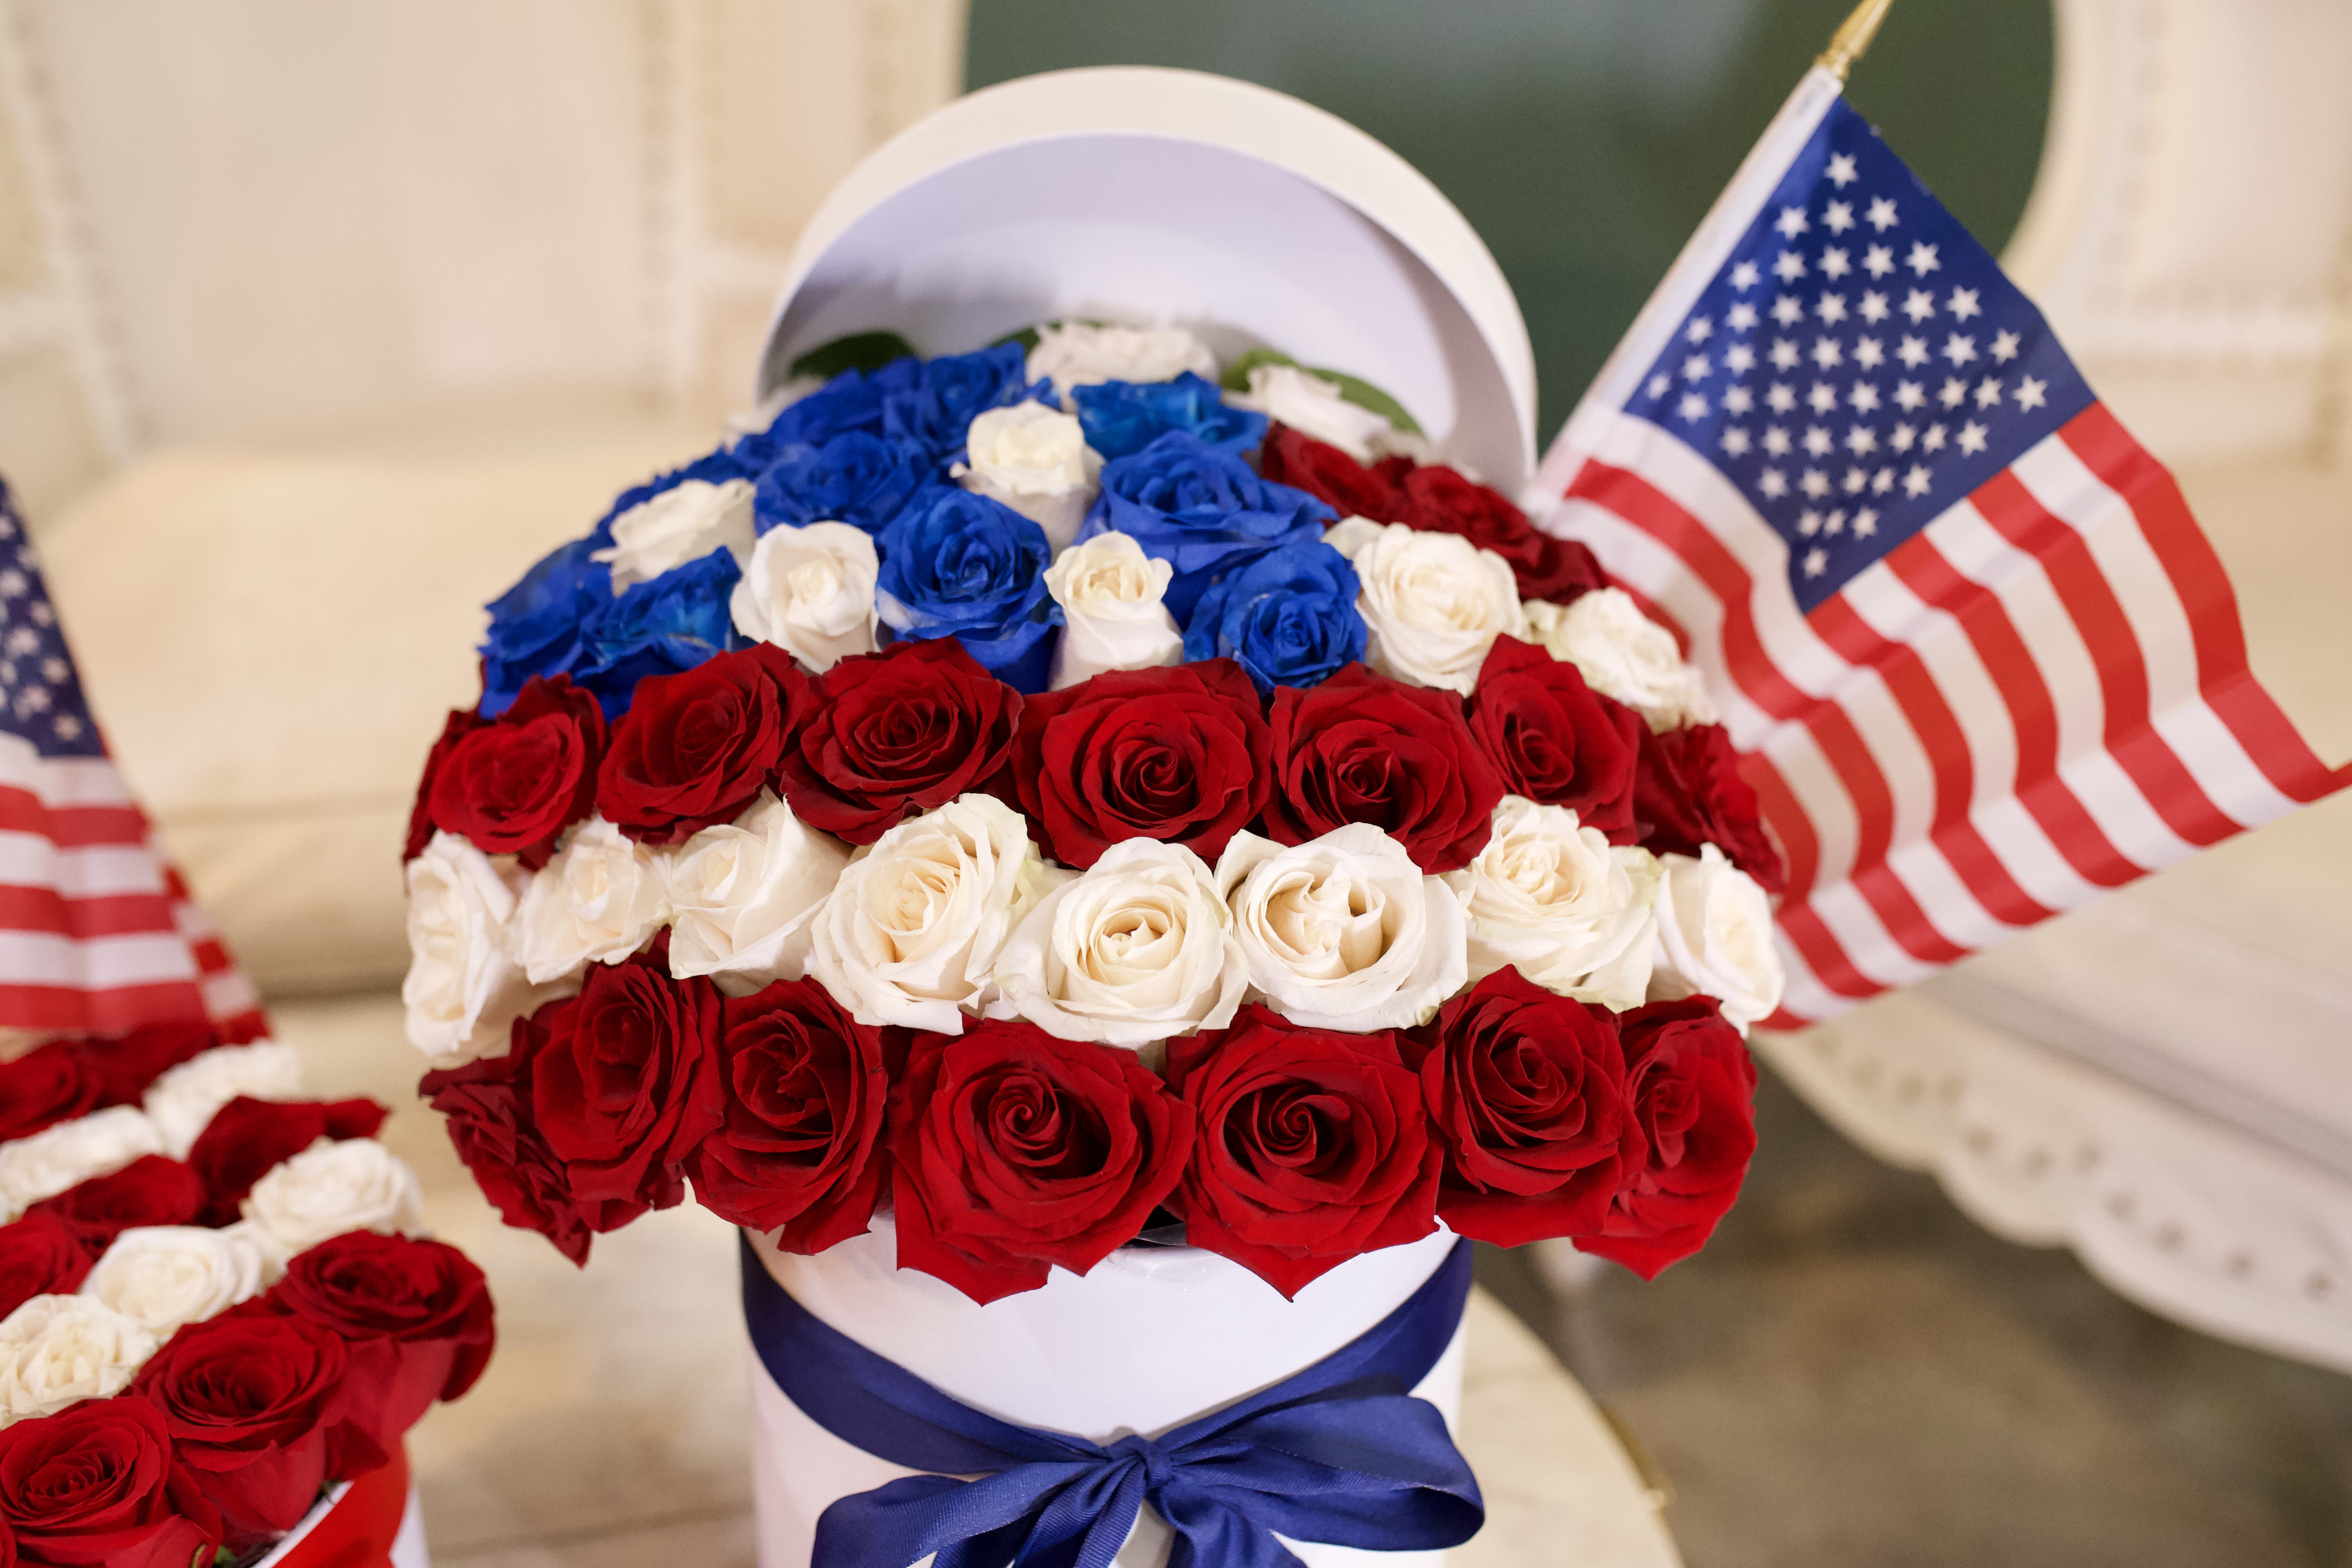 Memorial Day Red, White and Blue Bouquet (Large) - Made with 30 roses, the Memorial Day large bouquet comes in red, white, and blue roses with a blue ribbon and pearl white french hat box.